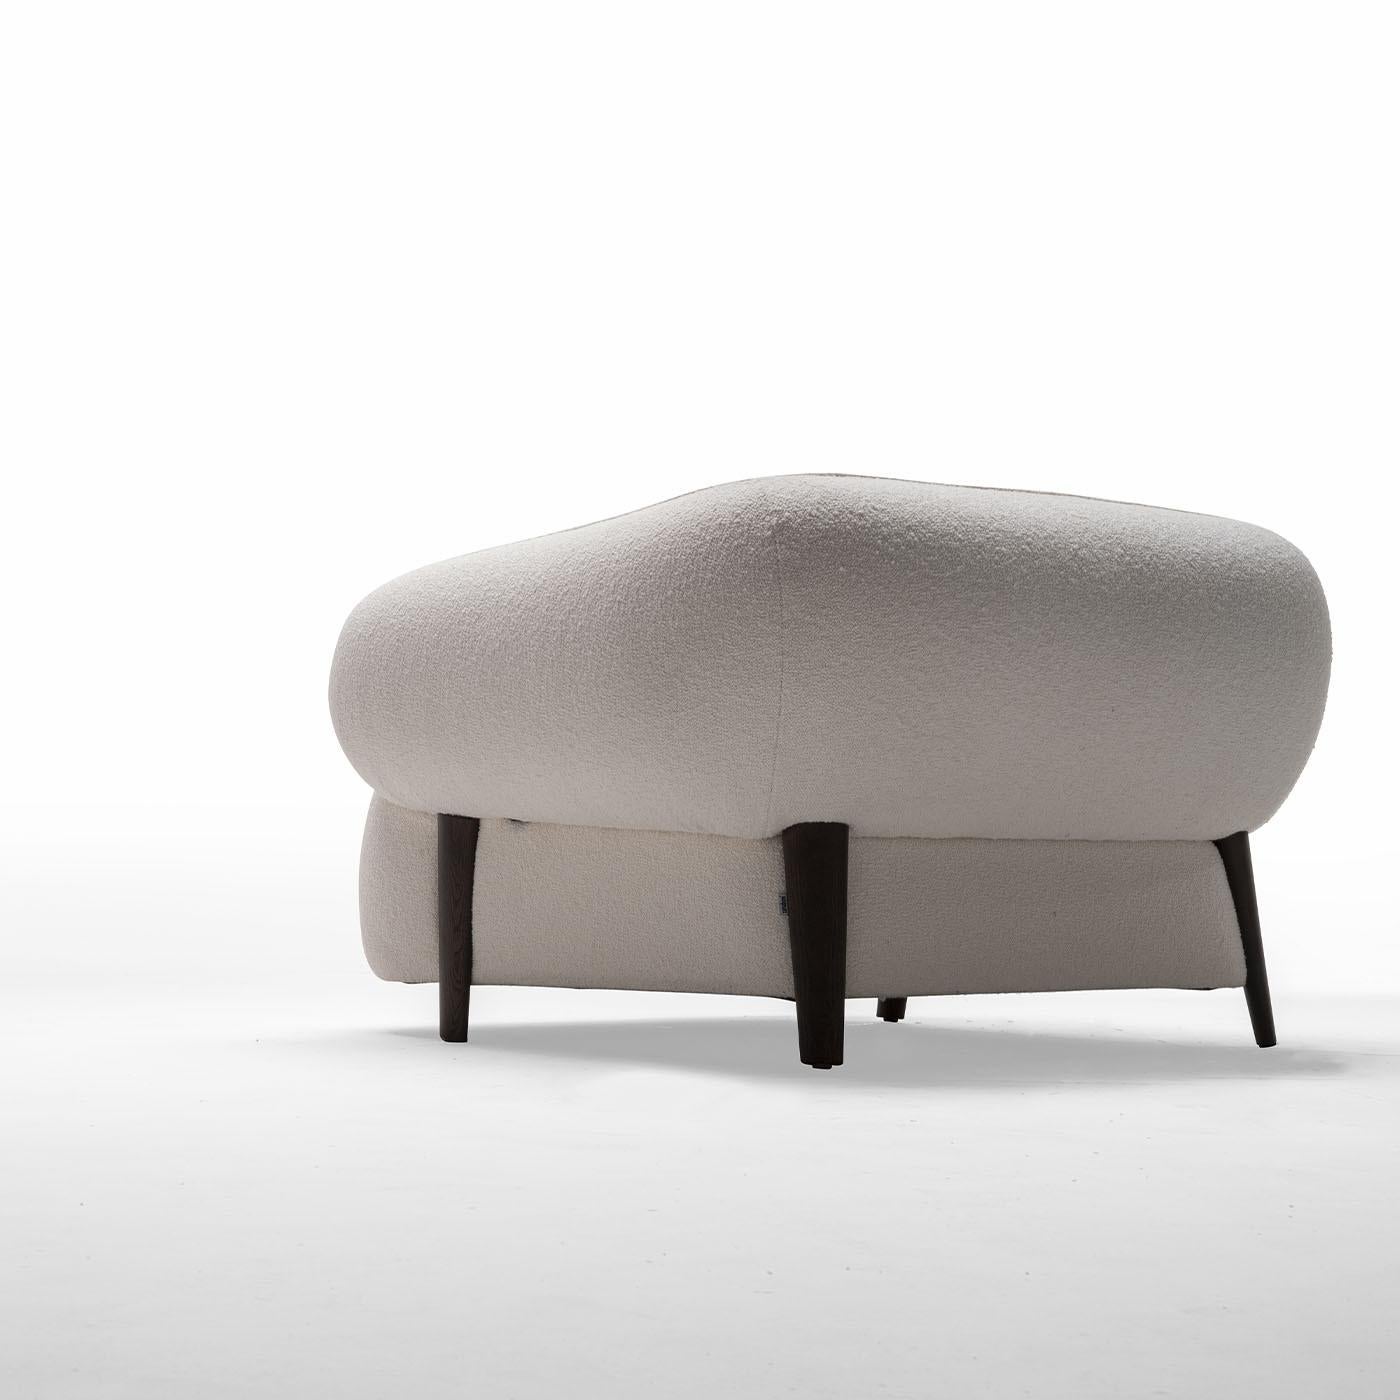 Ideally combined with its pouf counterpart for a cohesive look, this armchair invites one to take moments of pure relaxation embraced by its bold and plump volumes. The sleek gray-stained frame welcomes a wide seat fully enveloped by a single